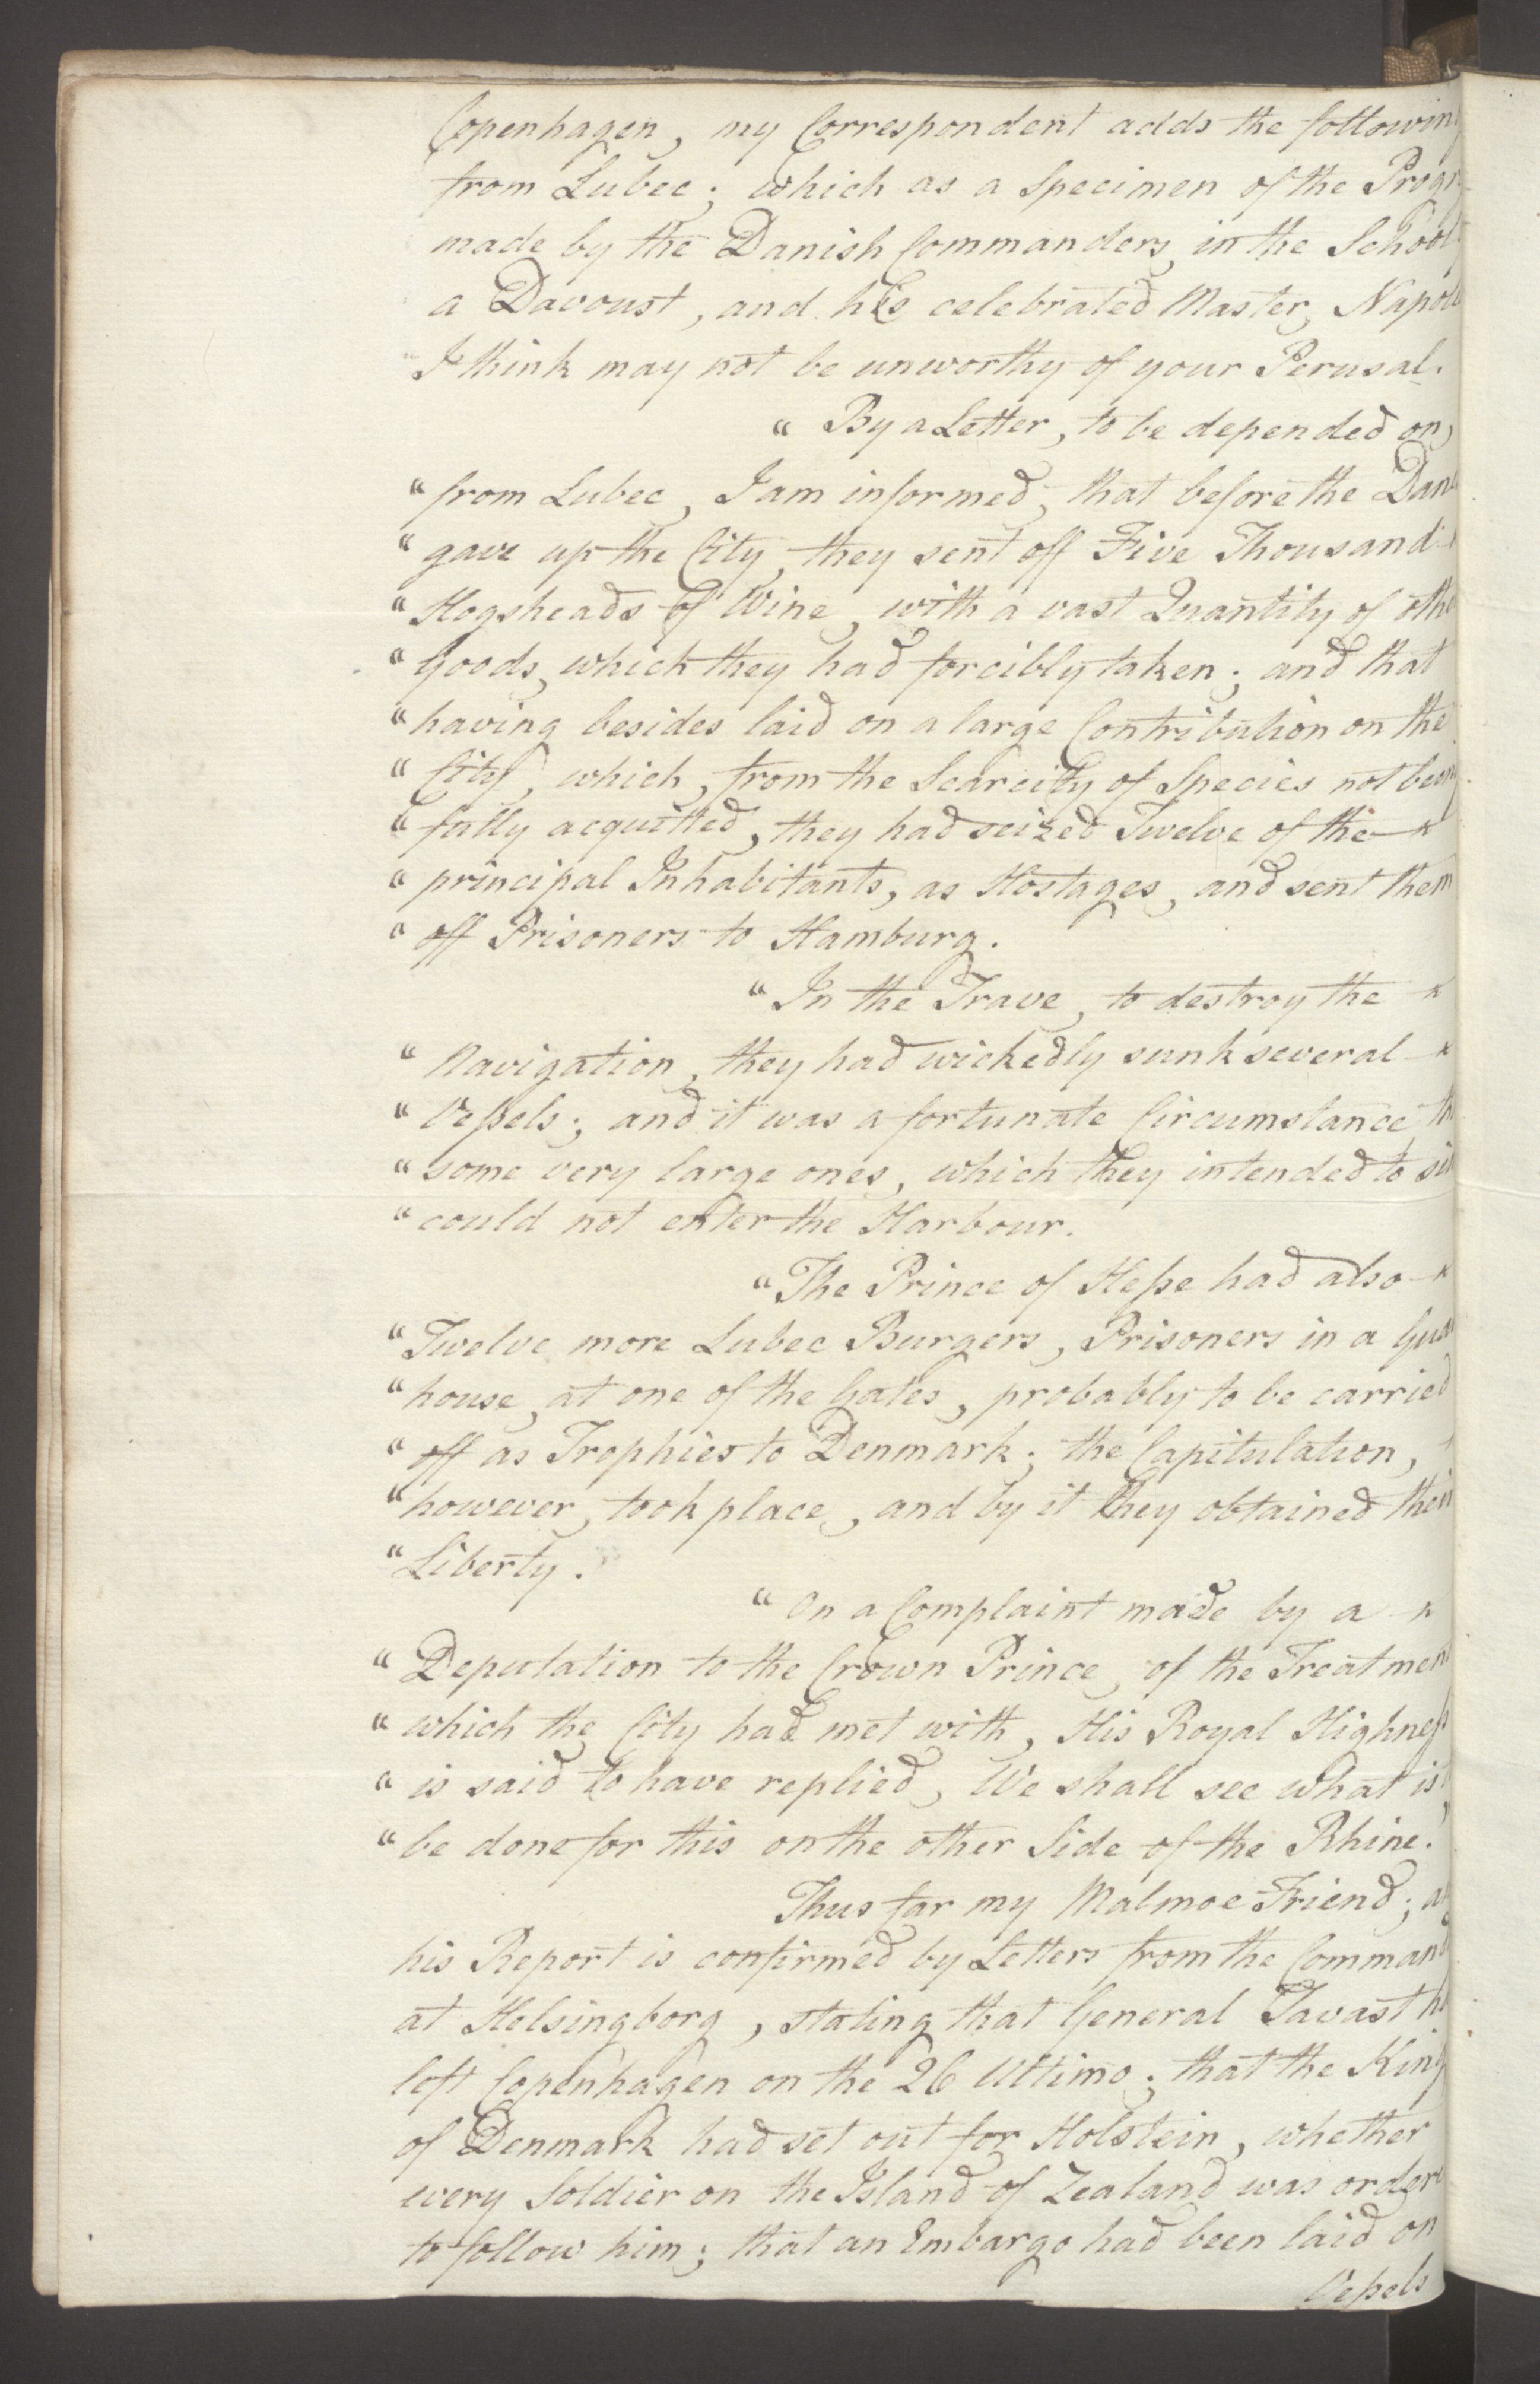 Foreign Office*, UKA/-/FO 38/16: Sir C. Gordon. Reports from Malmö, Jonkoping, and Helsingborg, 1814, p. 4